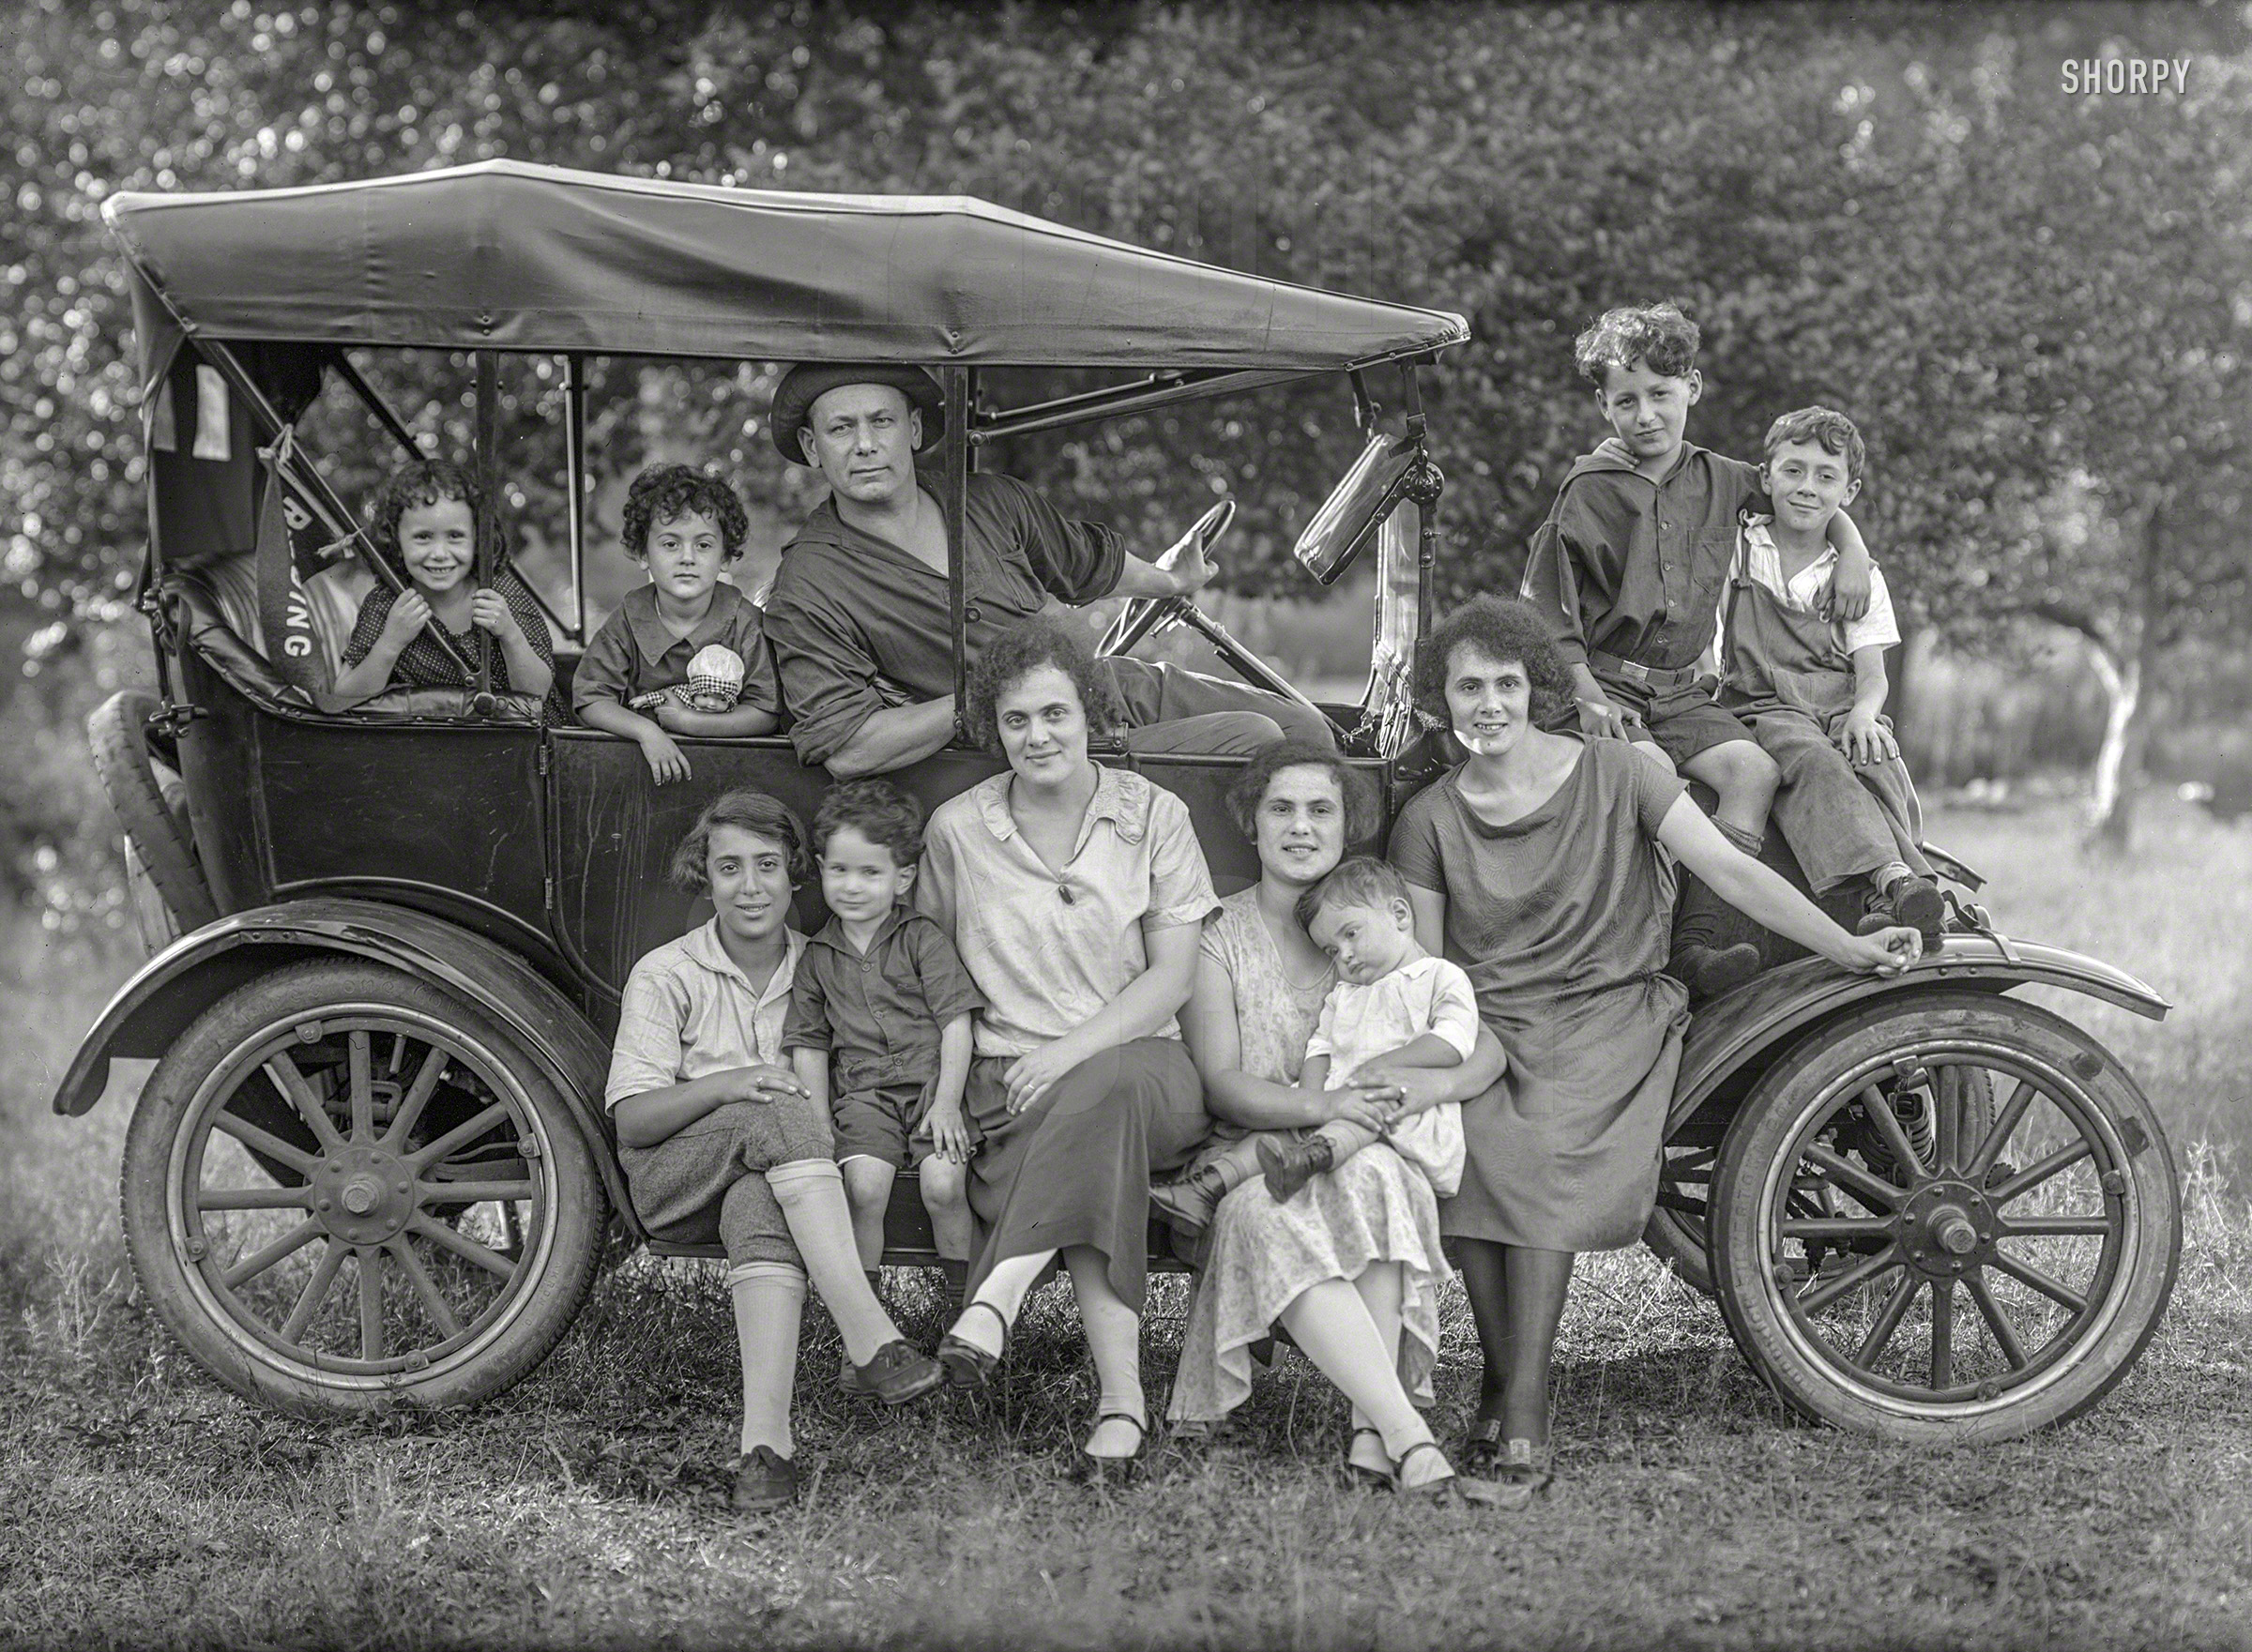 From somewhere in the Northeast circa 1920 comes this 5x7 glass negative, saved from the landfill thanks to an estate sale. Presumably these folks have moved on by now, having had what we hope was a pleasant journey. View full size.